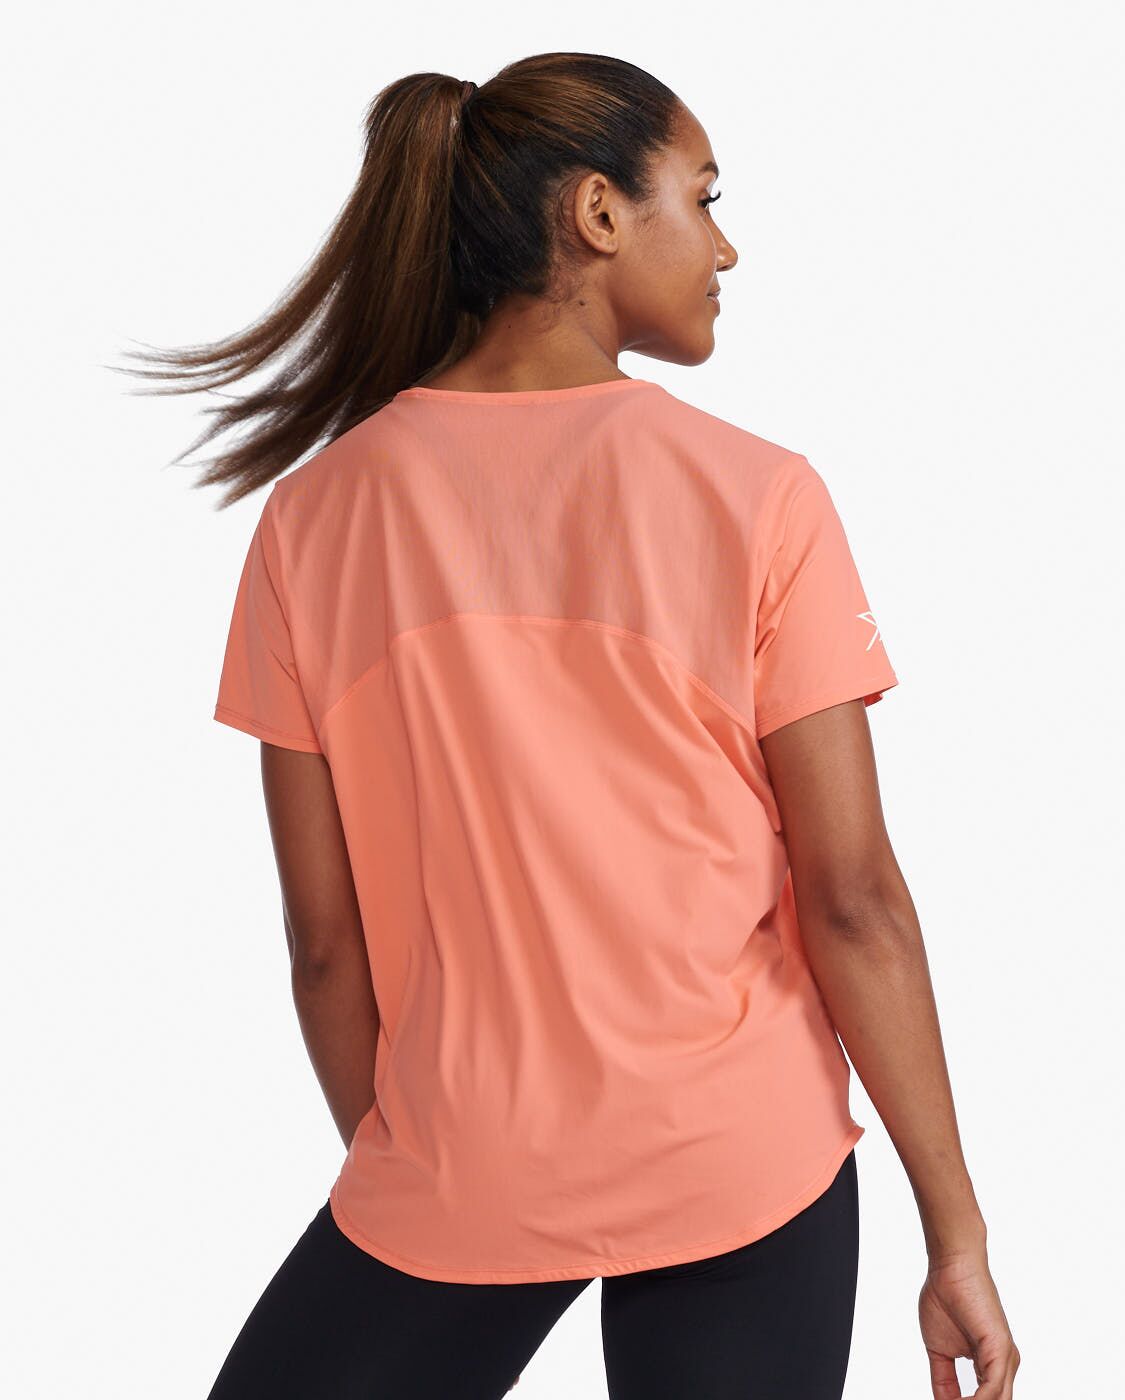 2XU South Africa - Womens Motion Mesh Tee - Hyper Coral/White Reflective